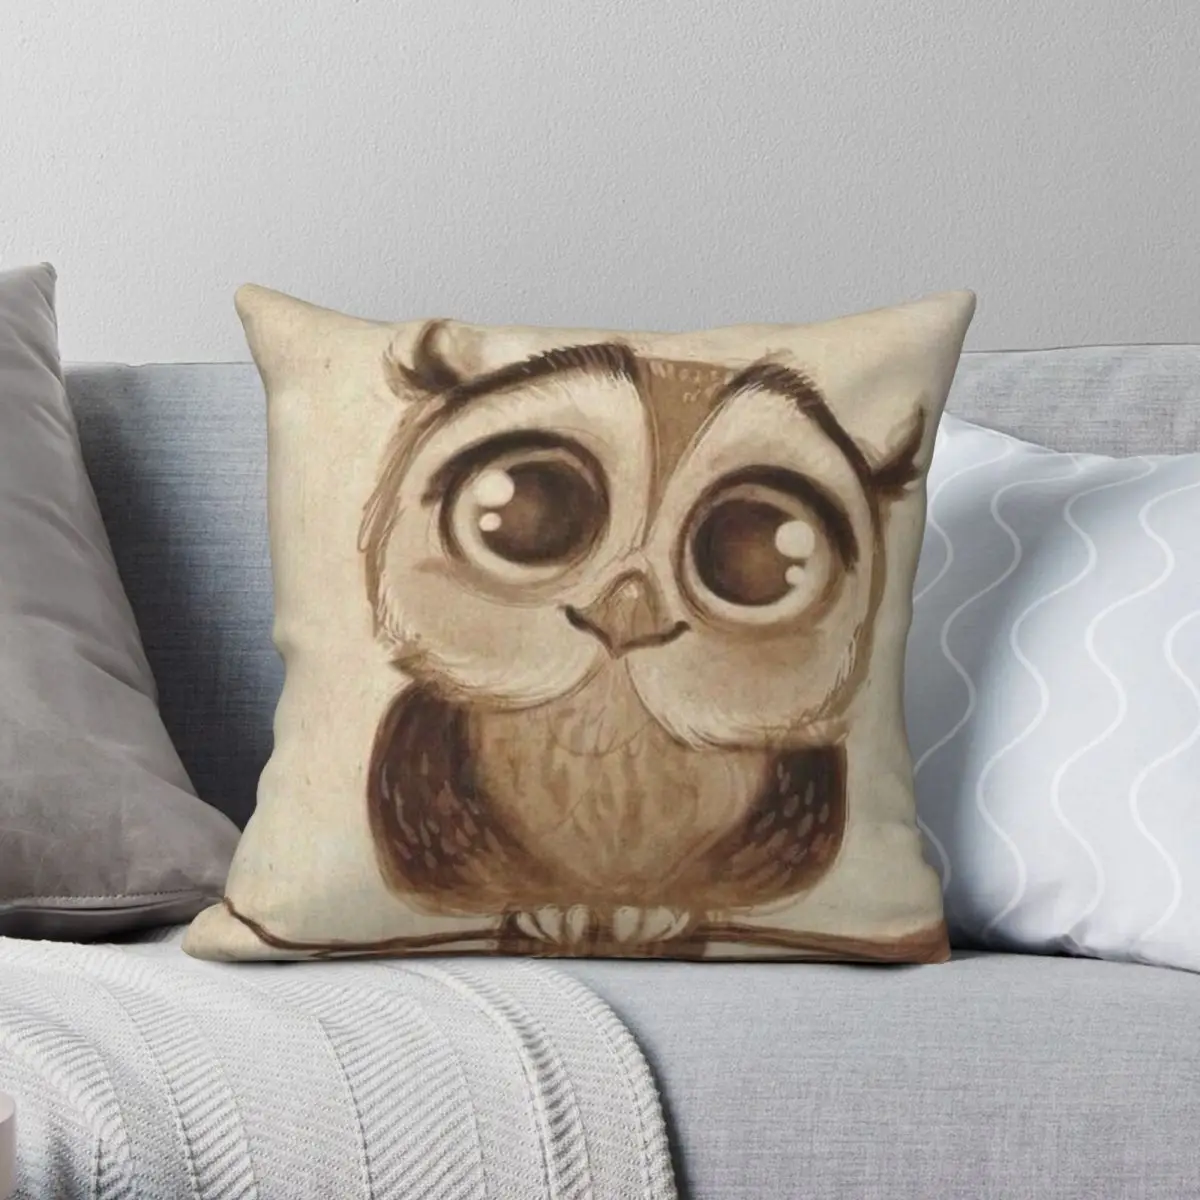 

Cute Chibi Owl Square Pillowcase Polyester Linen Velvet Printed Zip Decorative Bed Cushion Cover 18"